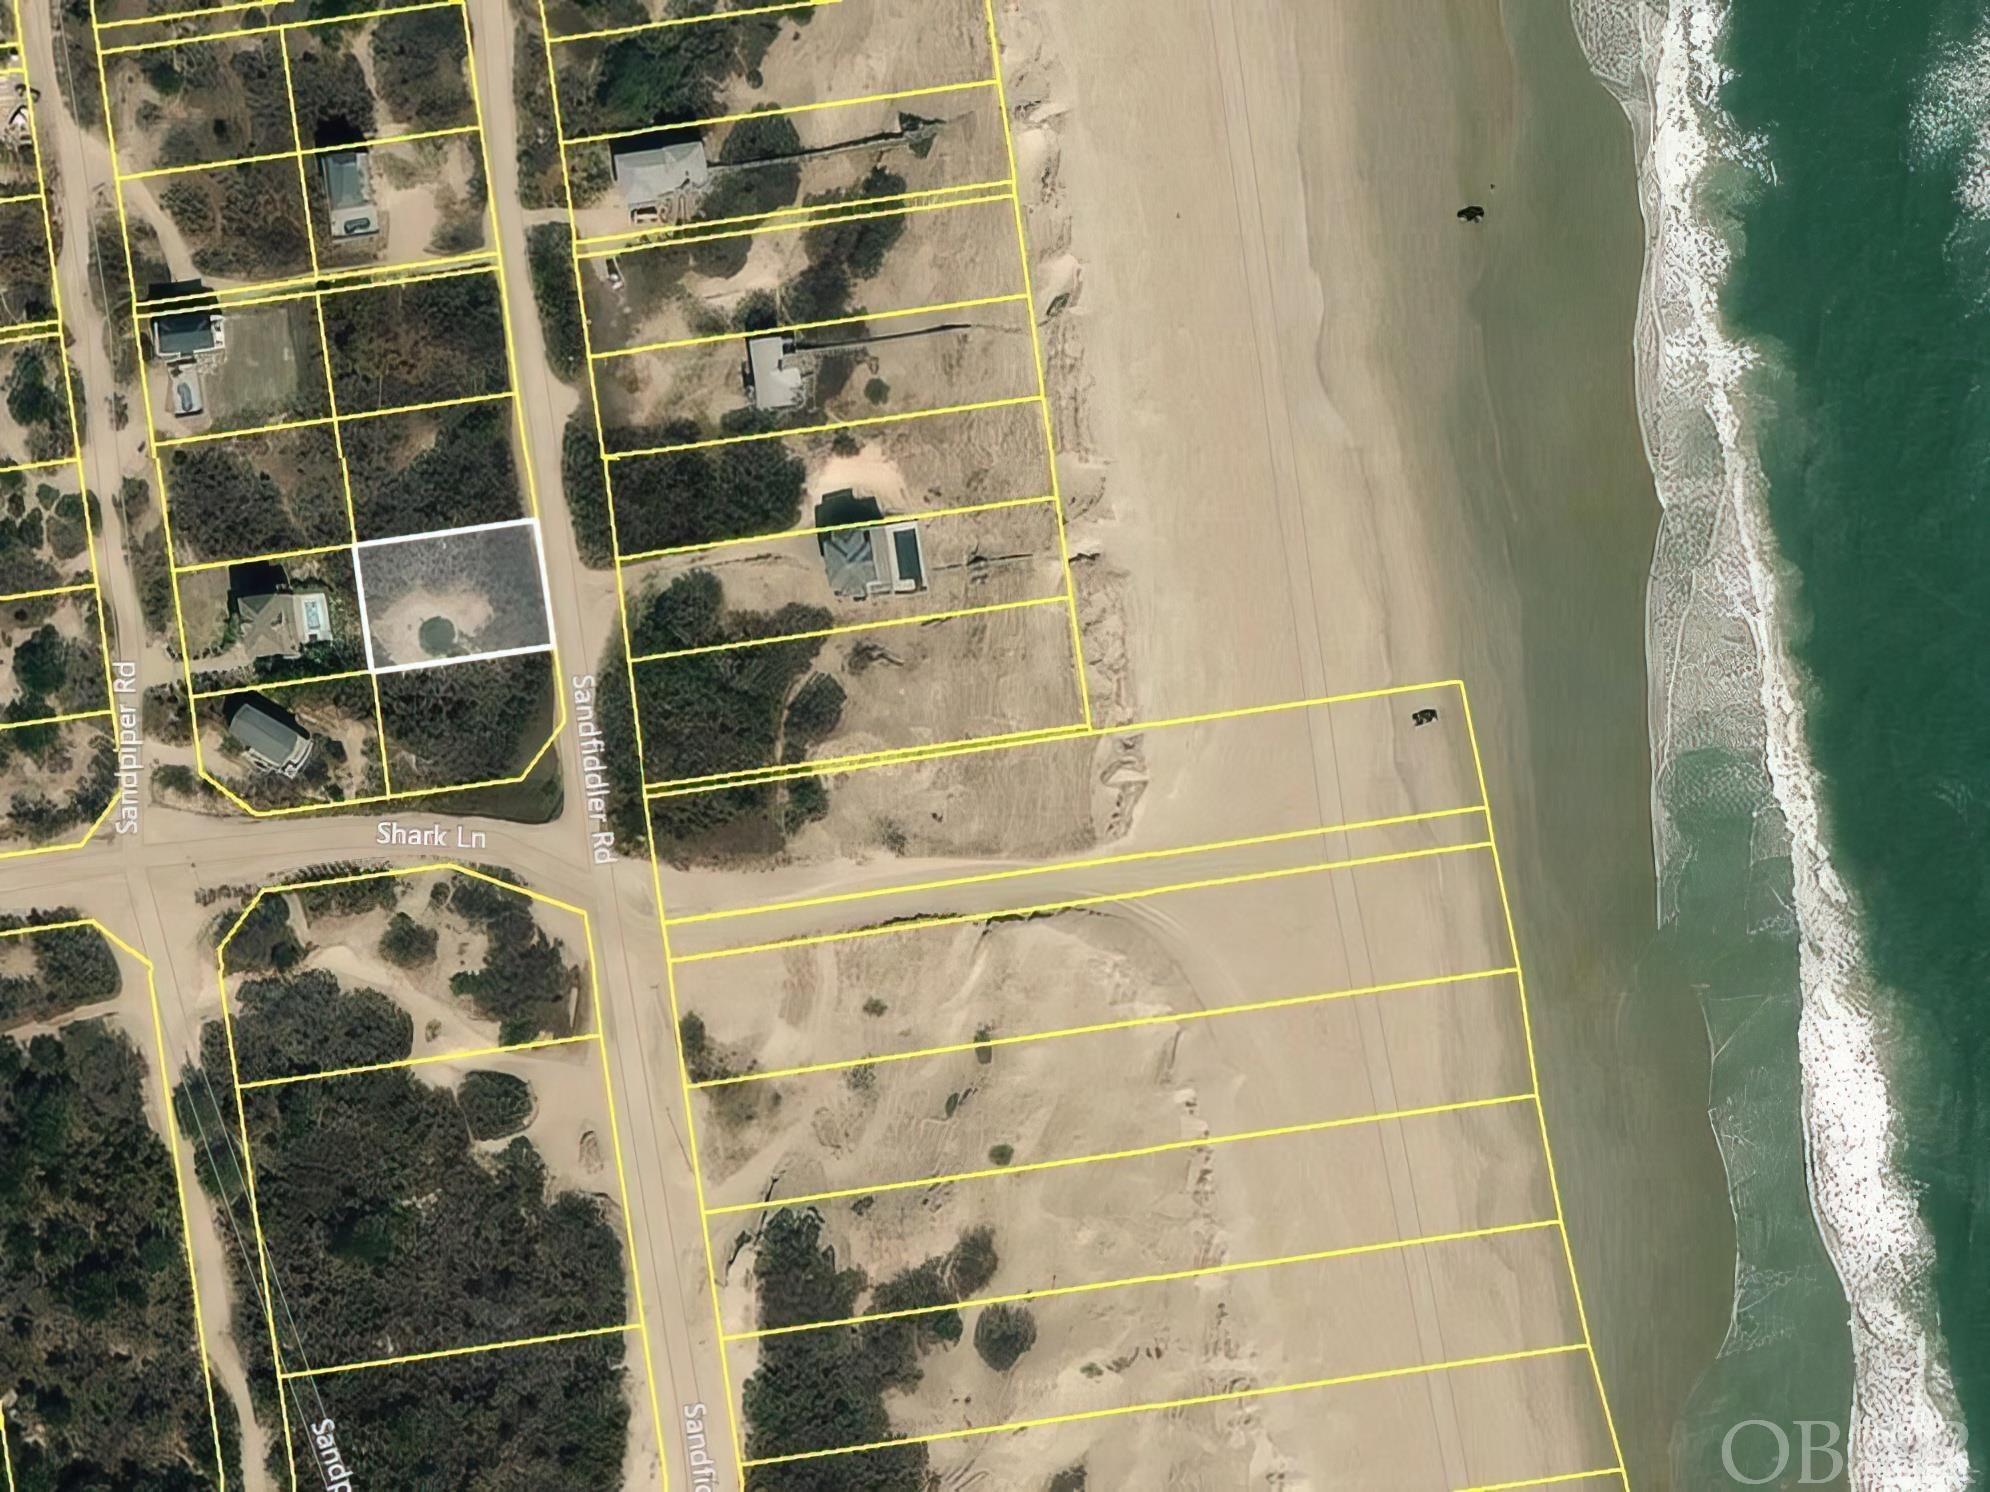 A beautiful Semi-Oceanfront home site in Carova Beach that doesn't have a lot of houses in front of it. Located near the heart of Carova Beach by the fire station with convenient access to the beach, out of the 500-year floodplain, and a GREAT PRICE! Ocean views should be possible from the windows and decks of your future beach house. Walk to the beach, or hop in you ATV and scoot on over to the Carova Beach Park. This lot has a lot of possibilities. Just pick your plans, build your house, and enjoy the views! Between the Dolphins swimming in the ocean, the pelicans gliding through the air, and the Corolla Wild Horses grazing on the Dunes what's not to love.